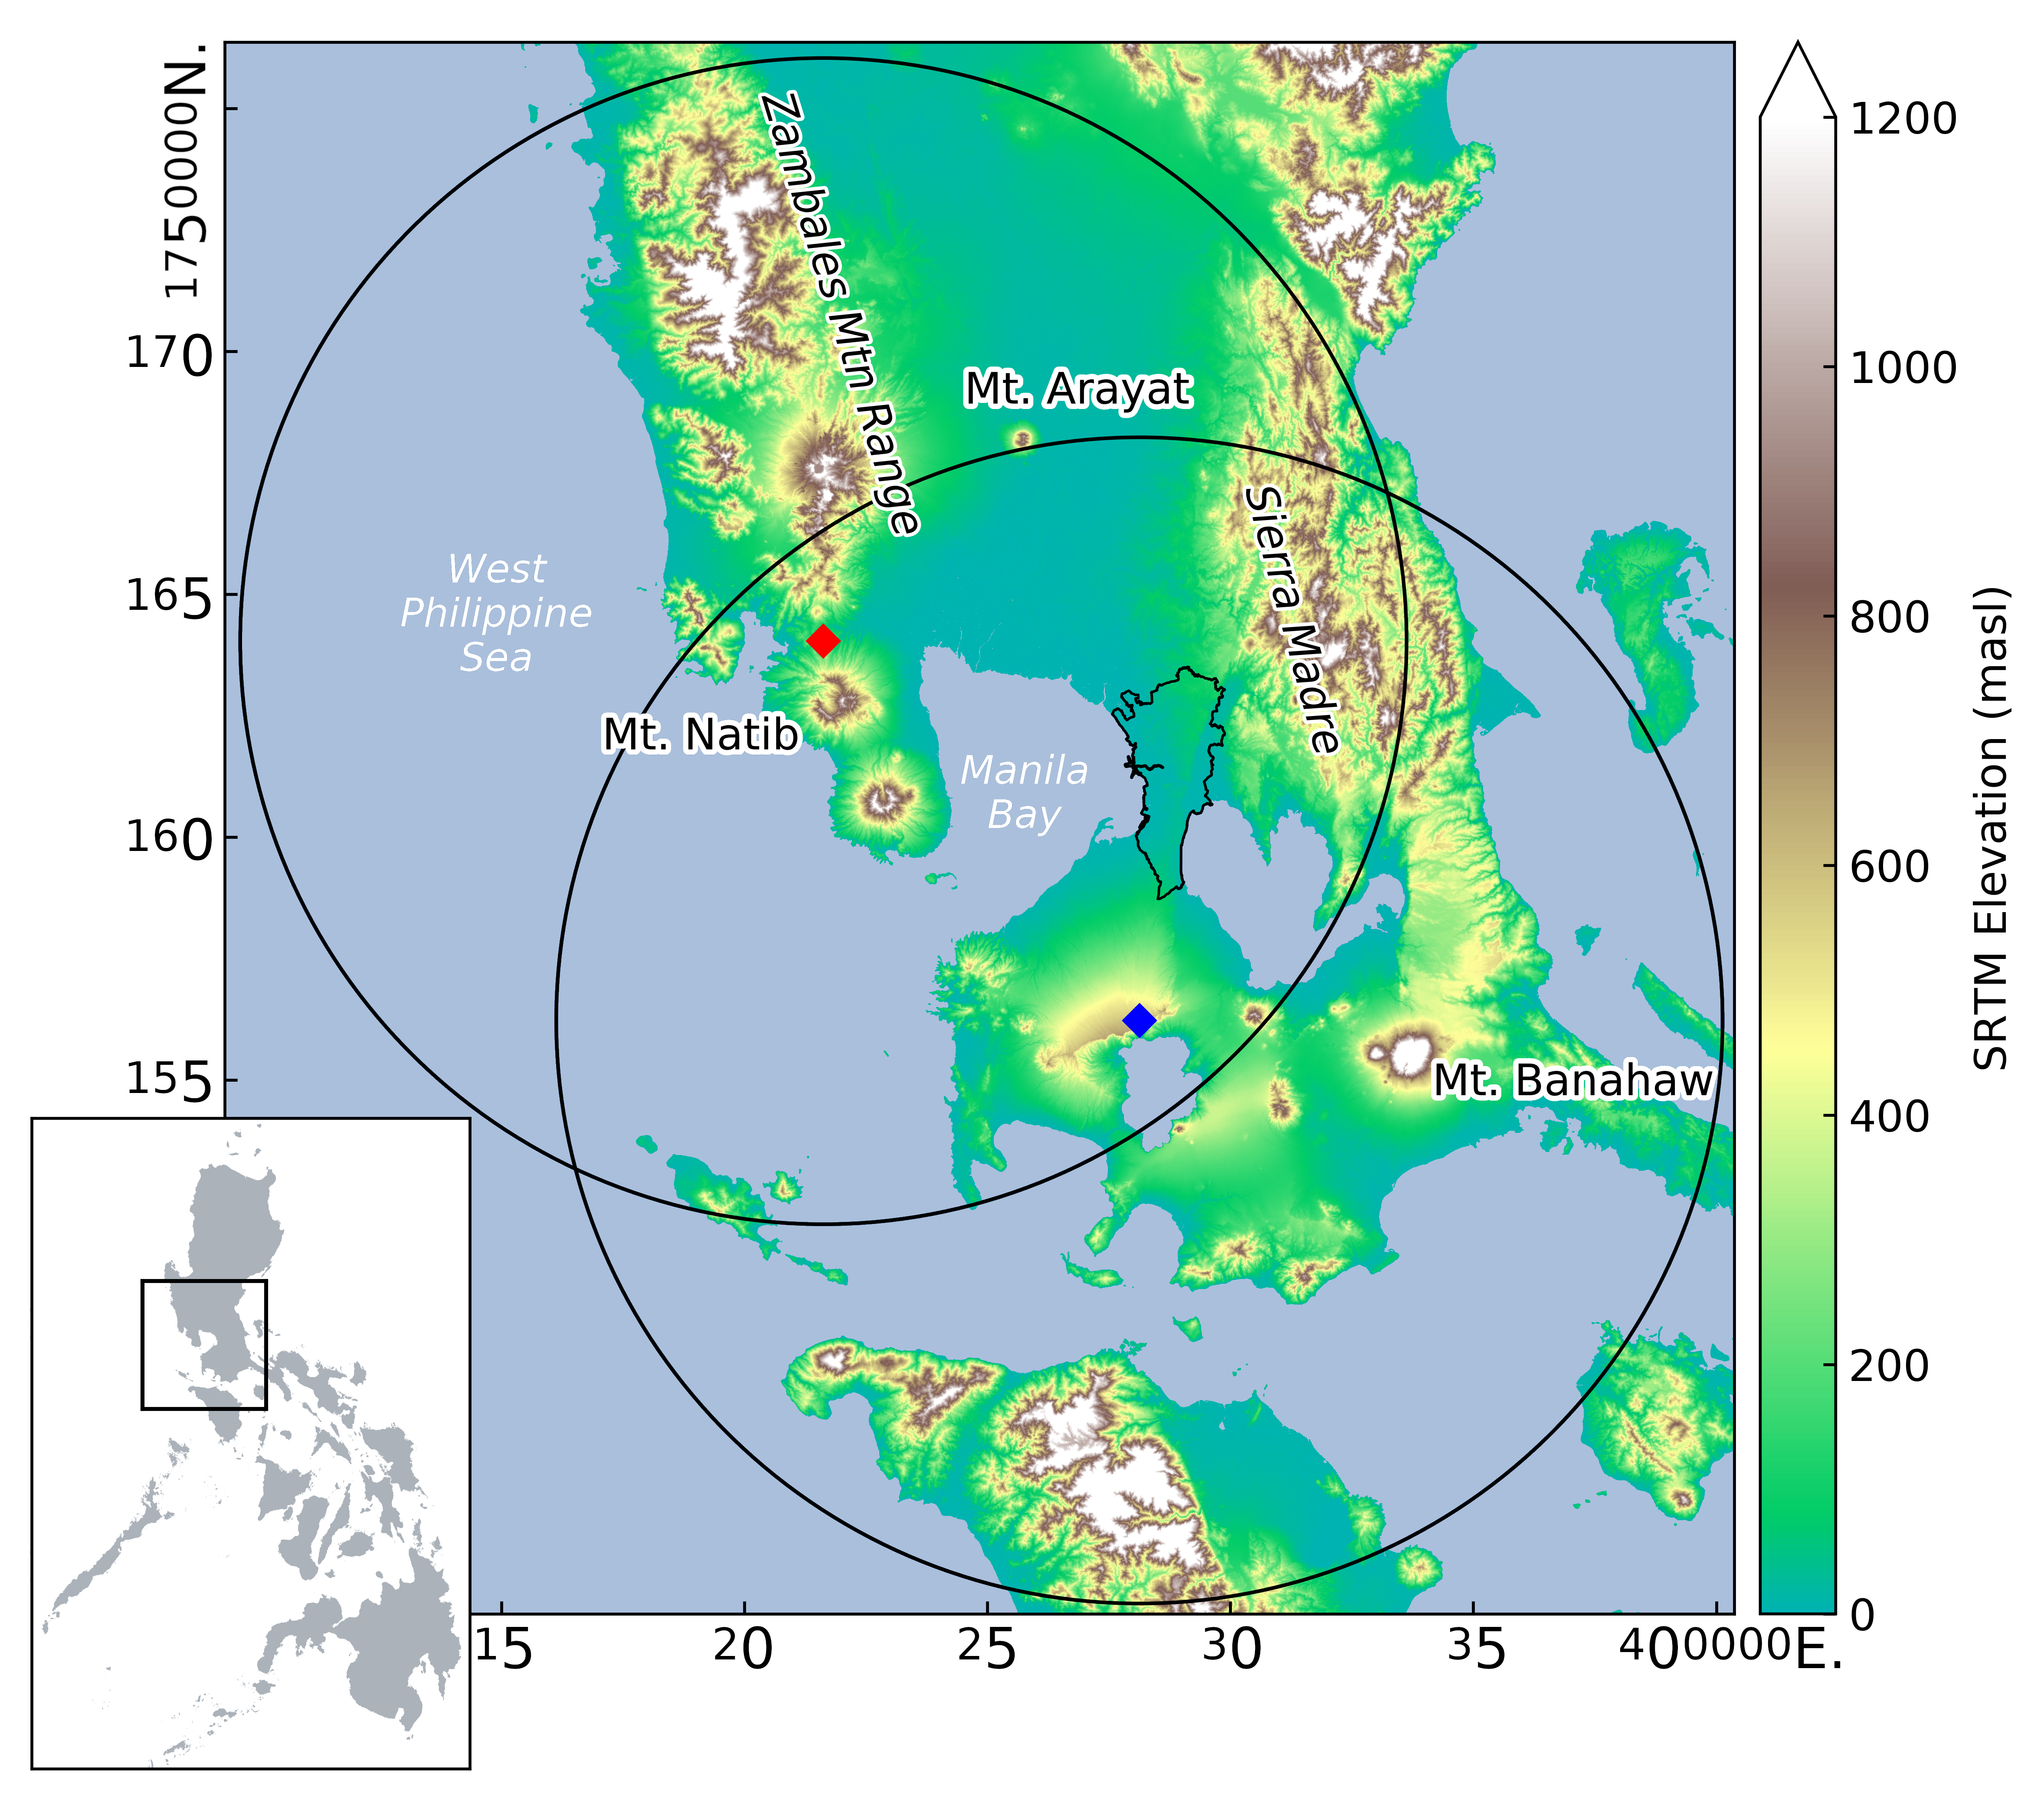 Locations of the Subic (red diamond) and Tagaytay (blue diamond) radars showing the 120 km range with the region of overlap. Metropolitan Manila is outlined in black beside Manila Bay. The relative location of the study area with respect to the Philippines is shown in the inset